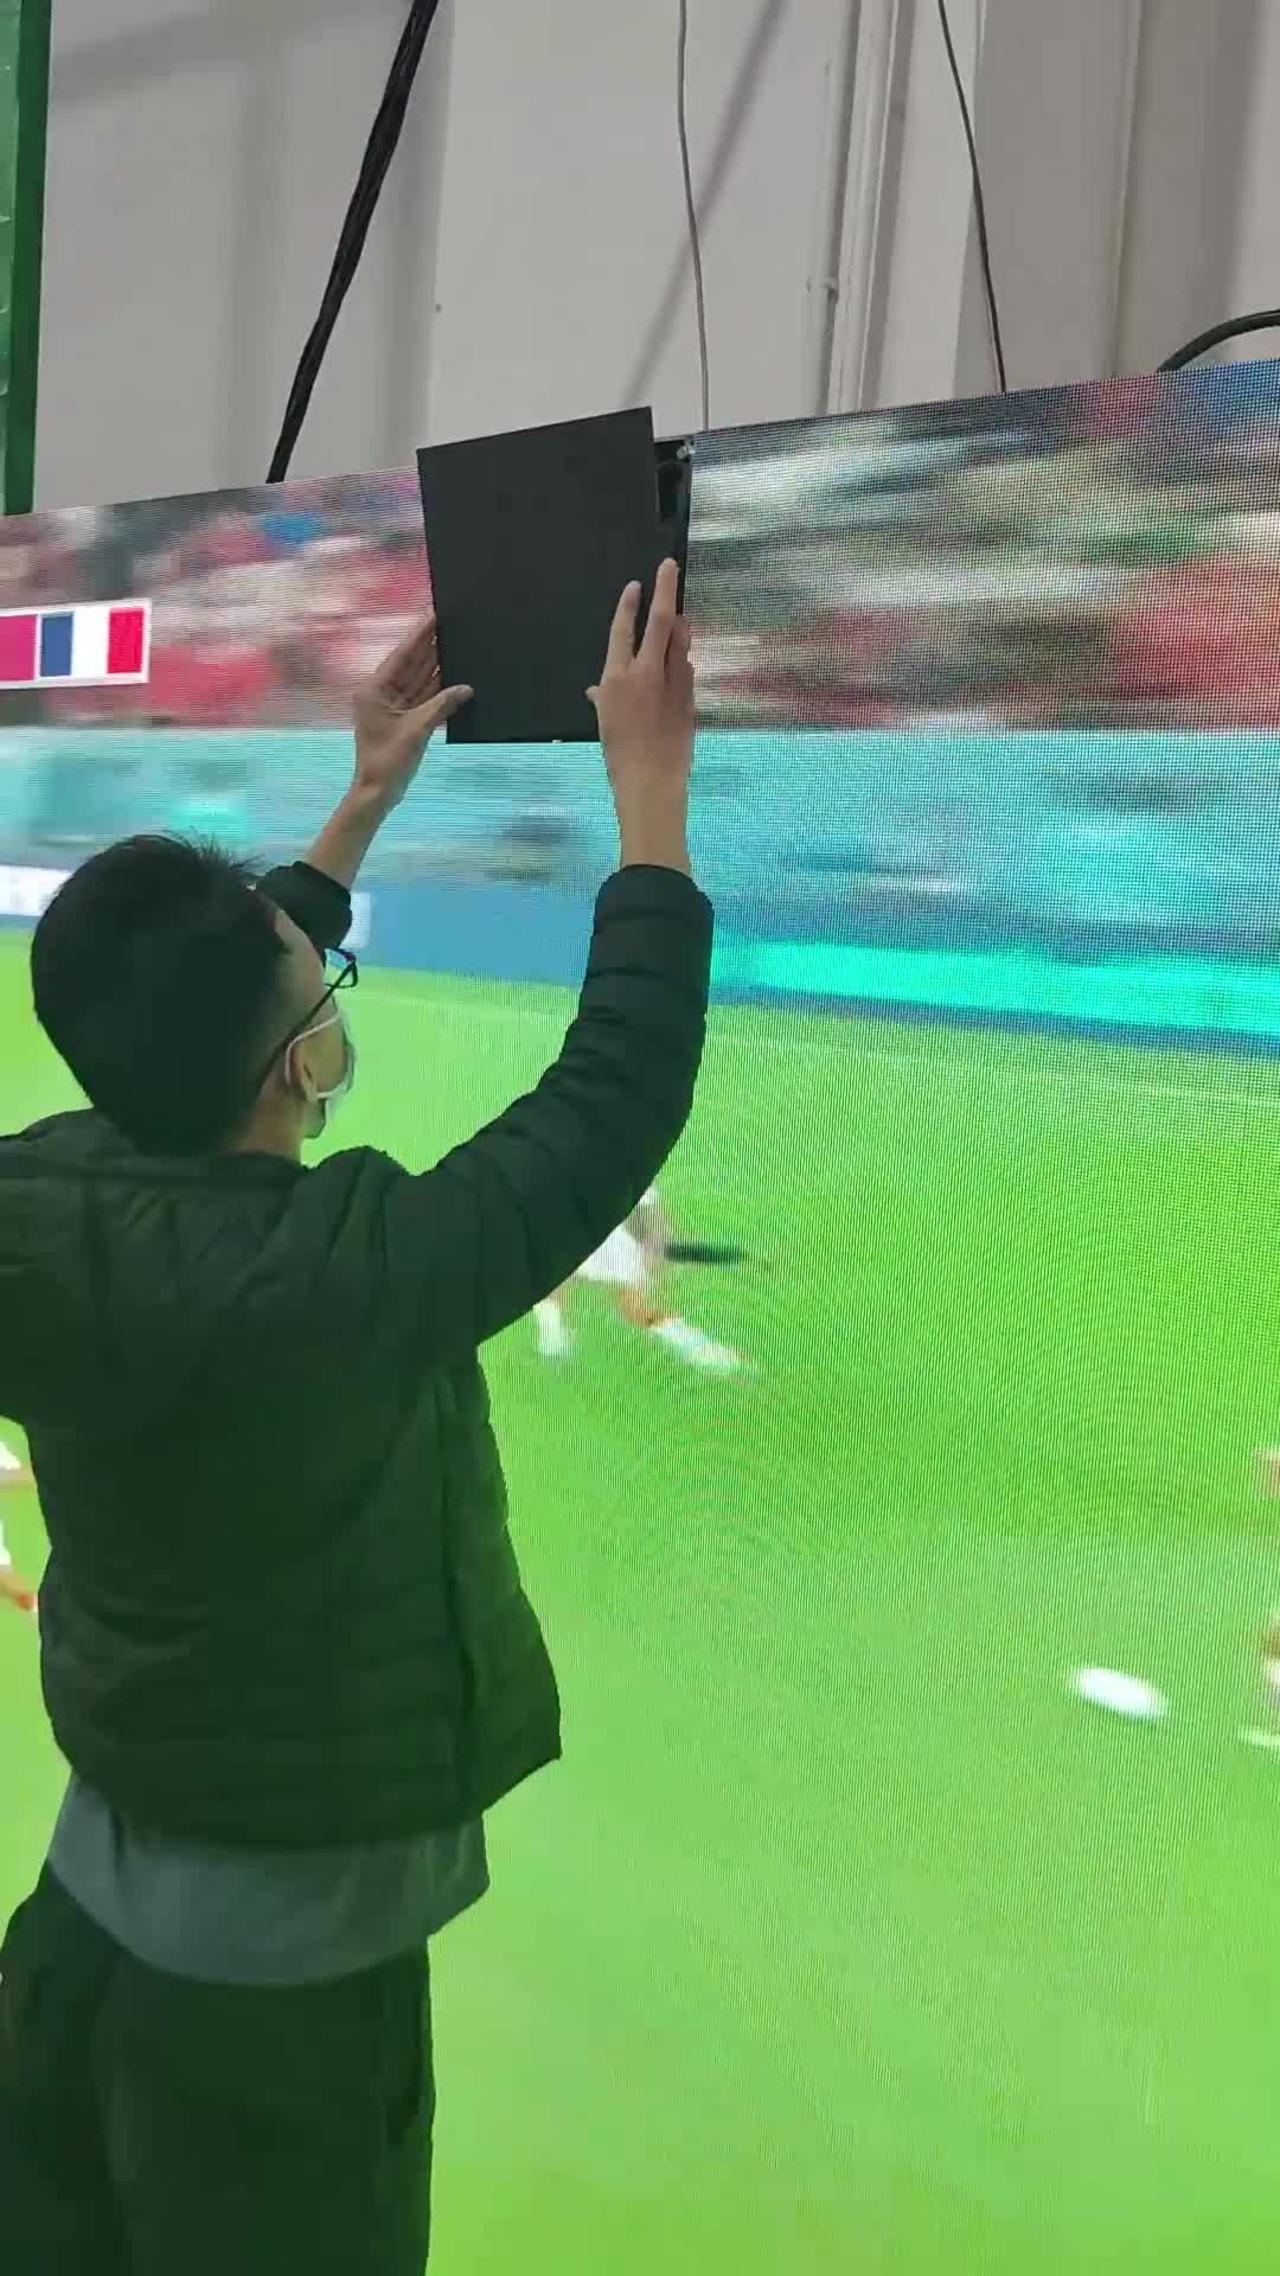 (Tunisia vs. France) Watch the wonderful goals of the World Cup on the large LED display.